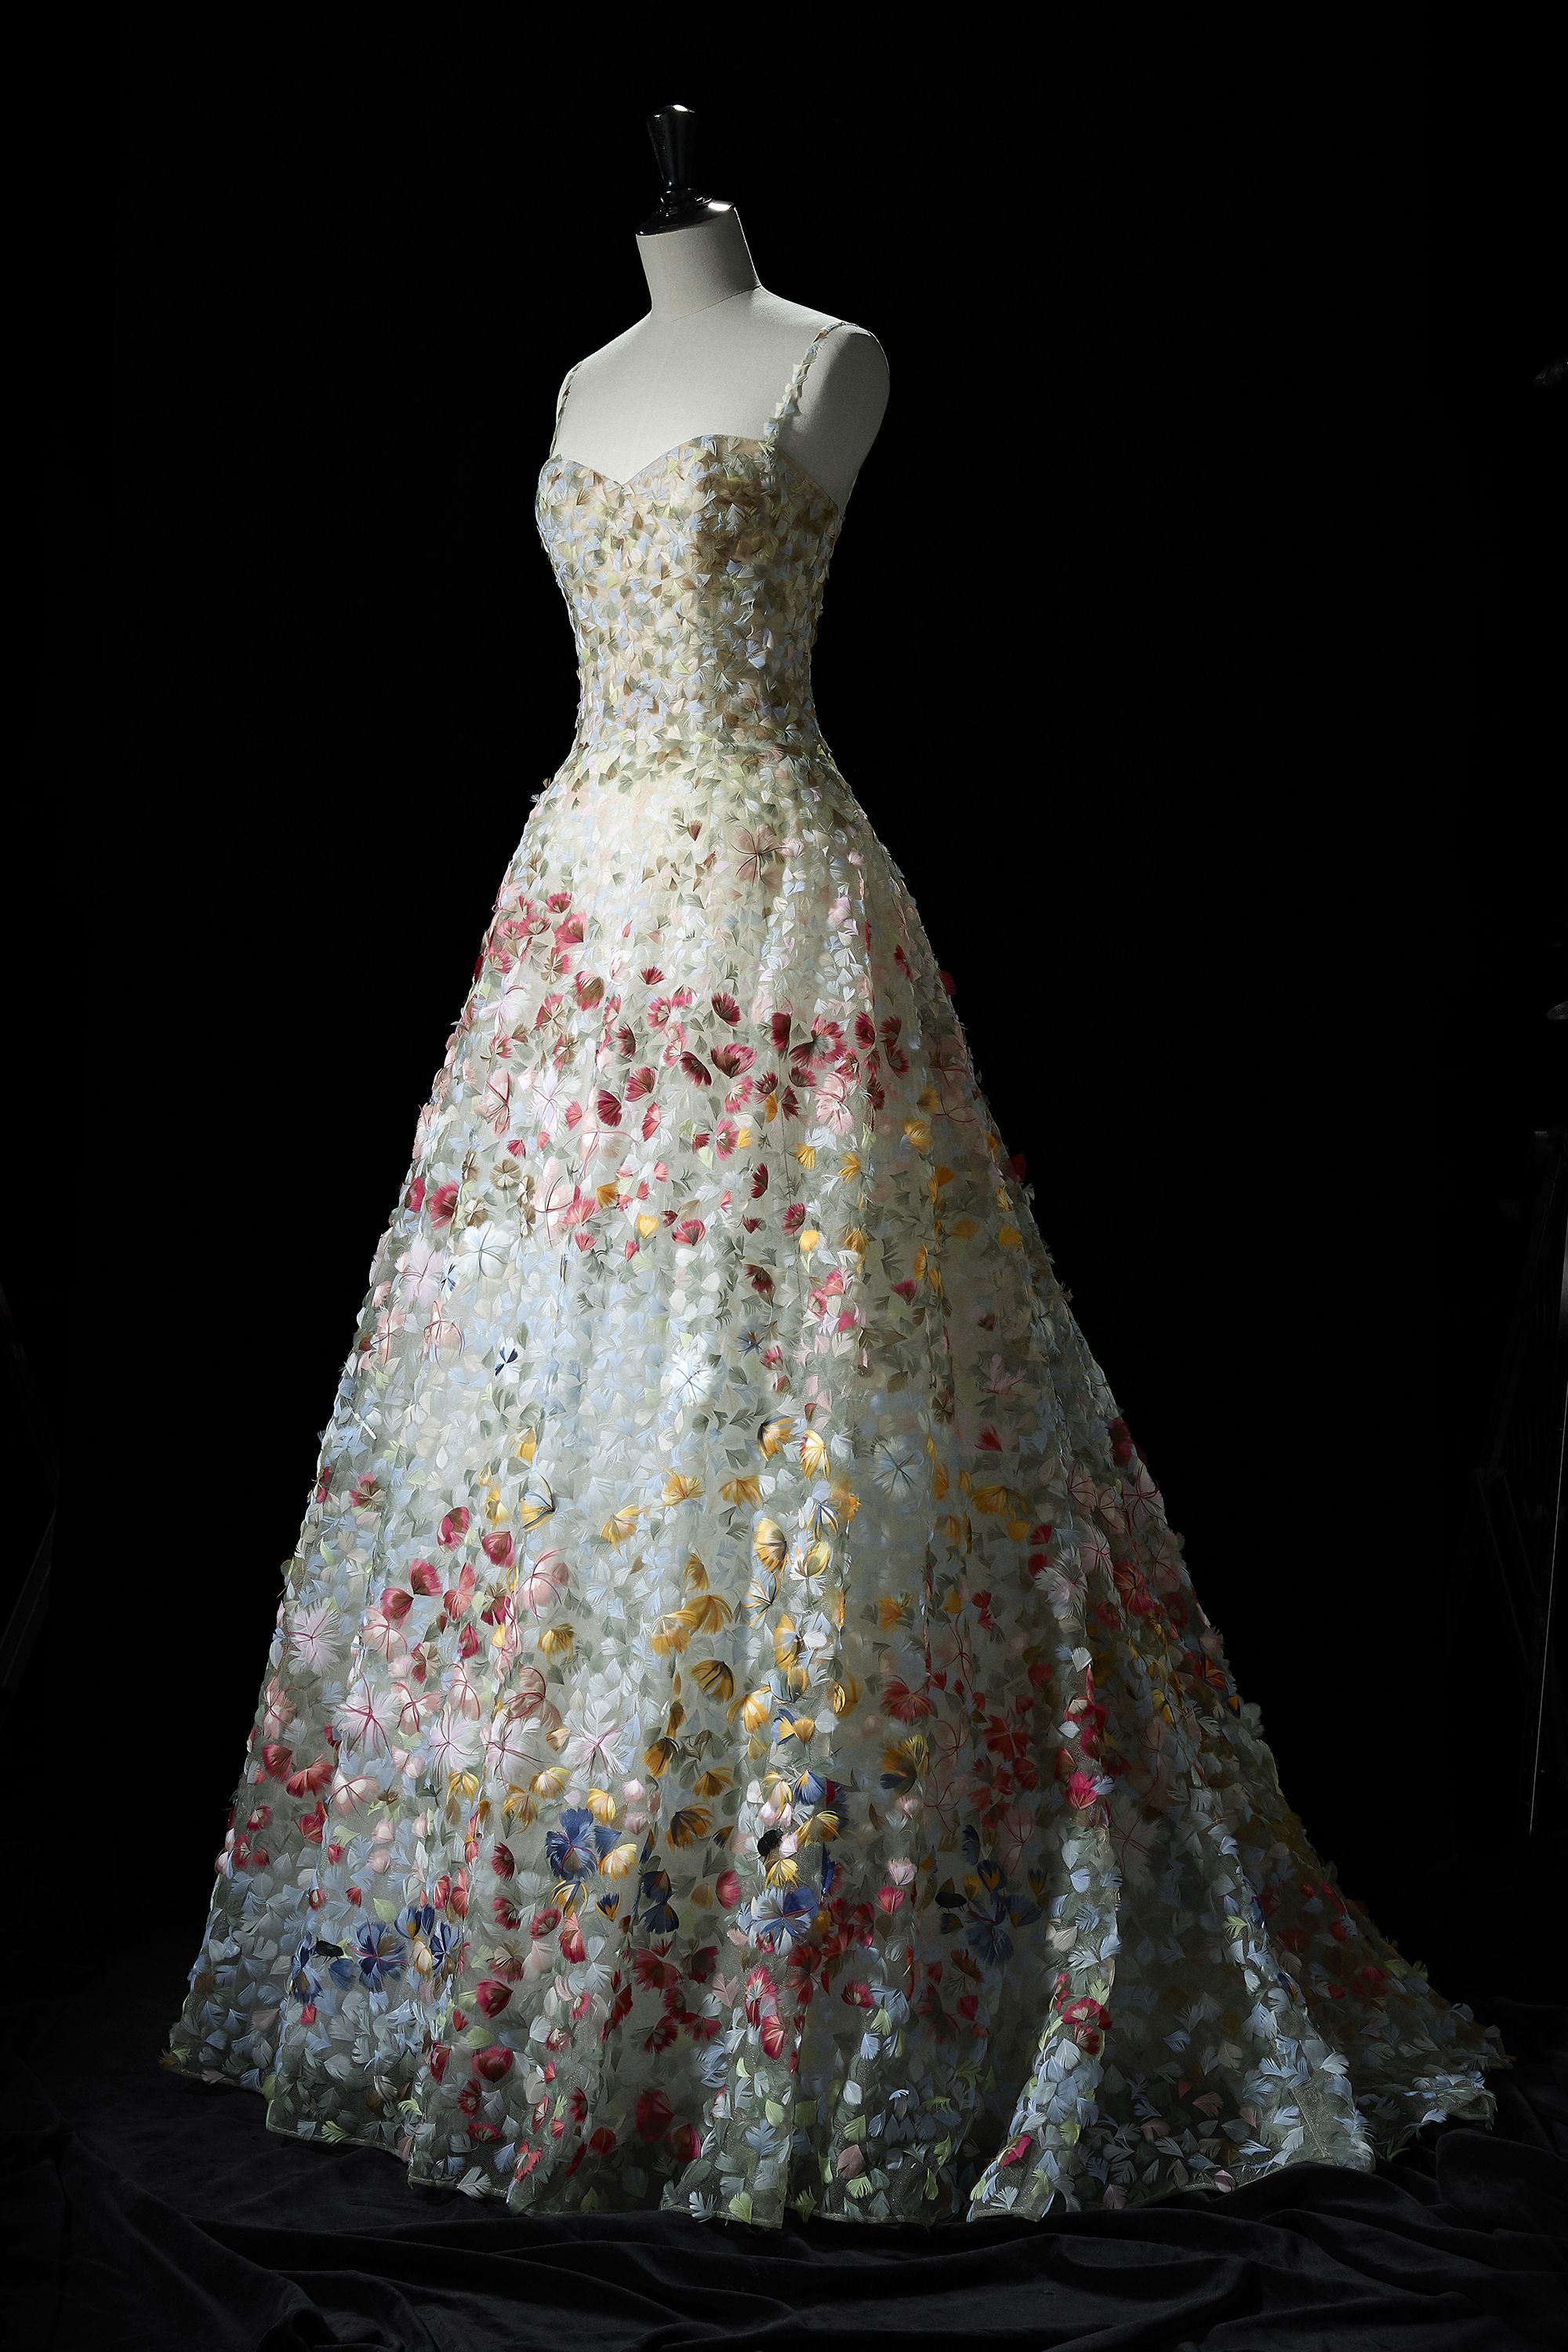 Inside the Stunning Christian Dior Exhibit at London's Victoria